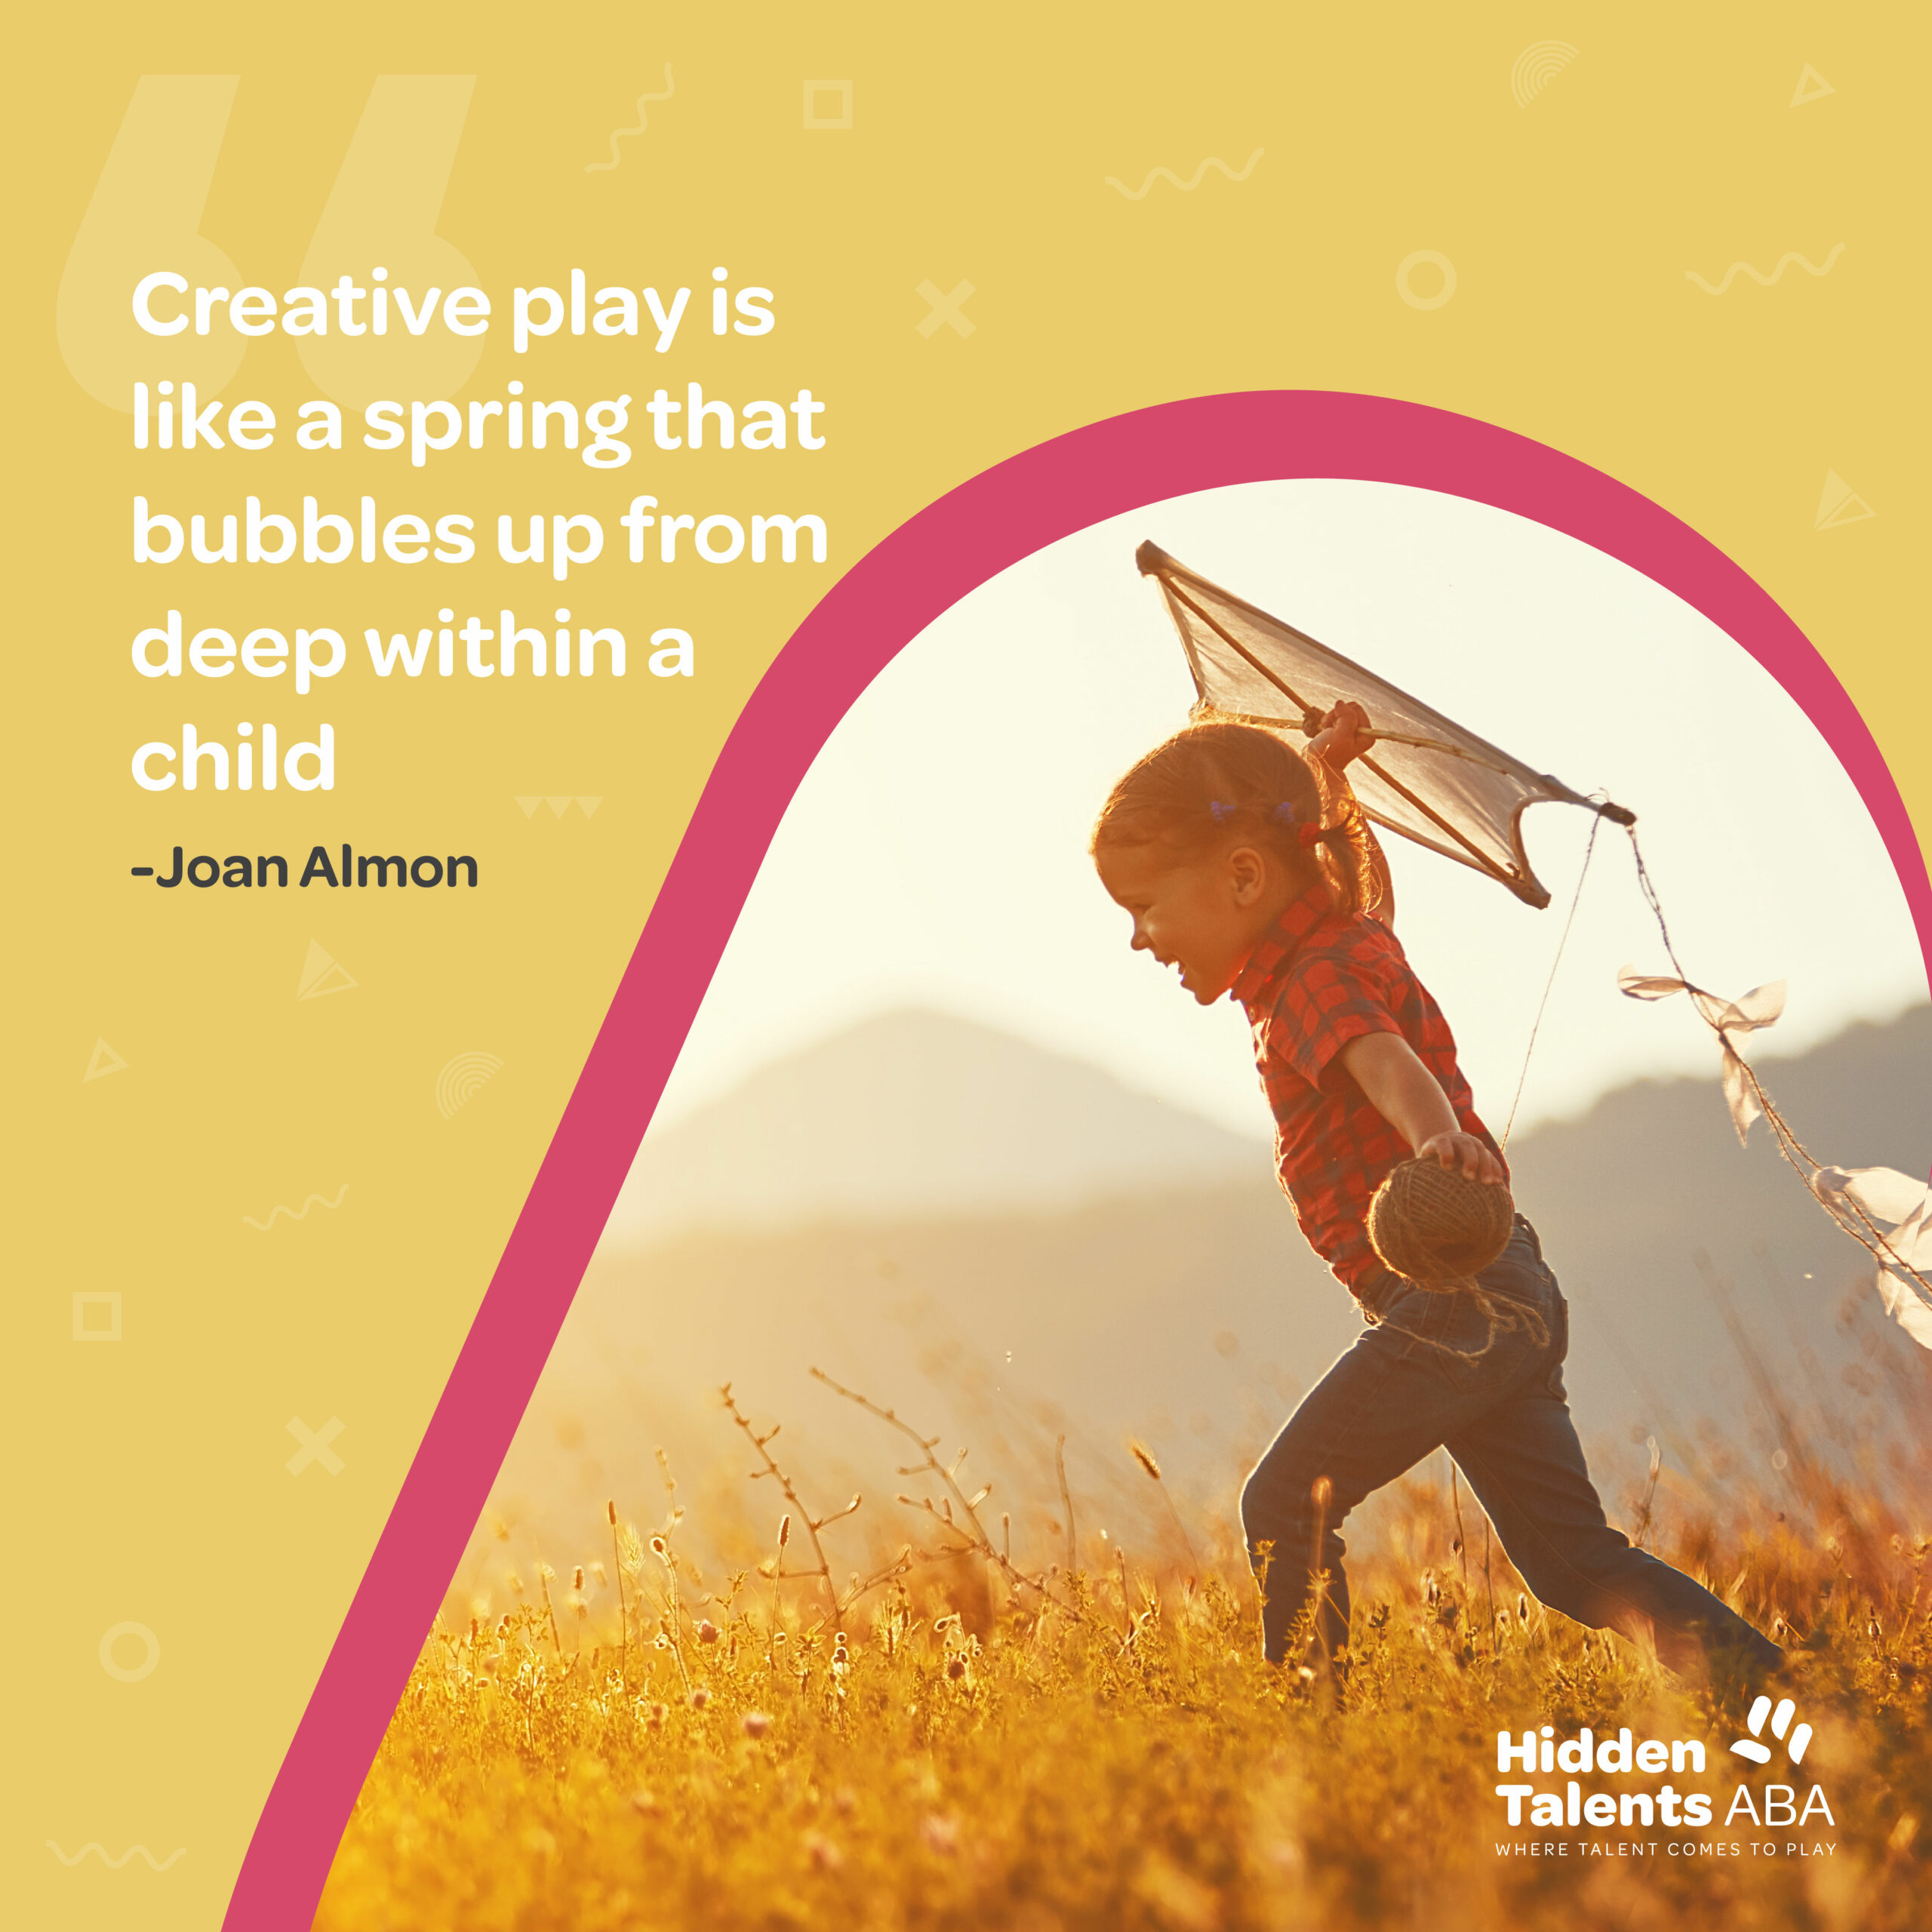 Image of a kid playing kite and accompanied by inspirational quotes